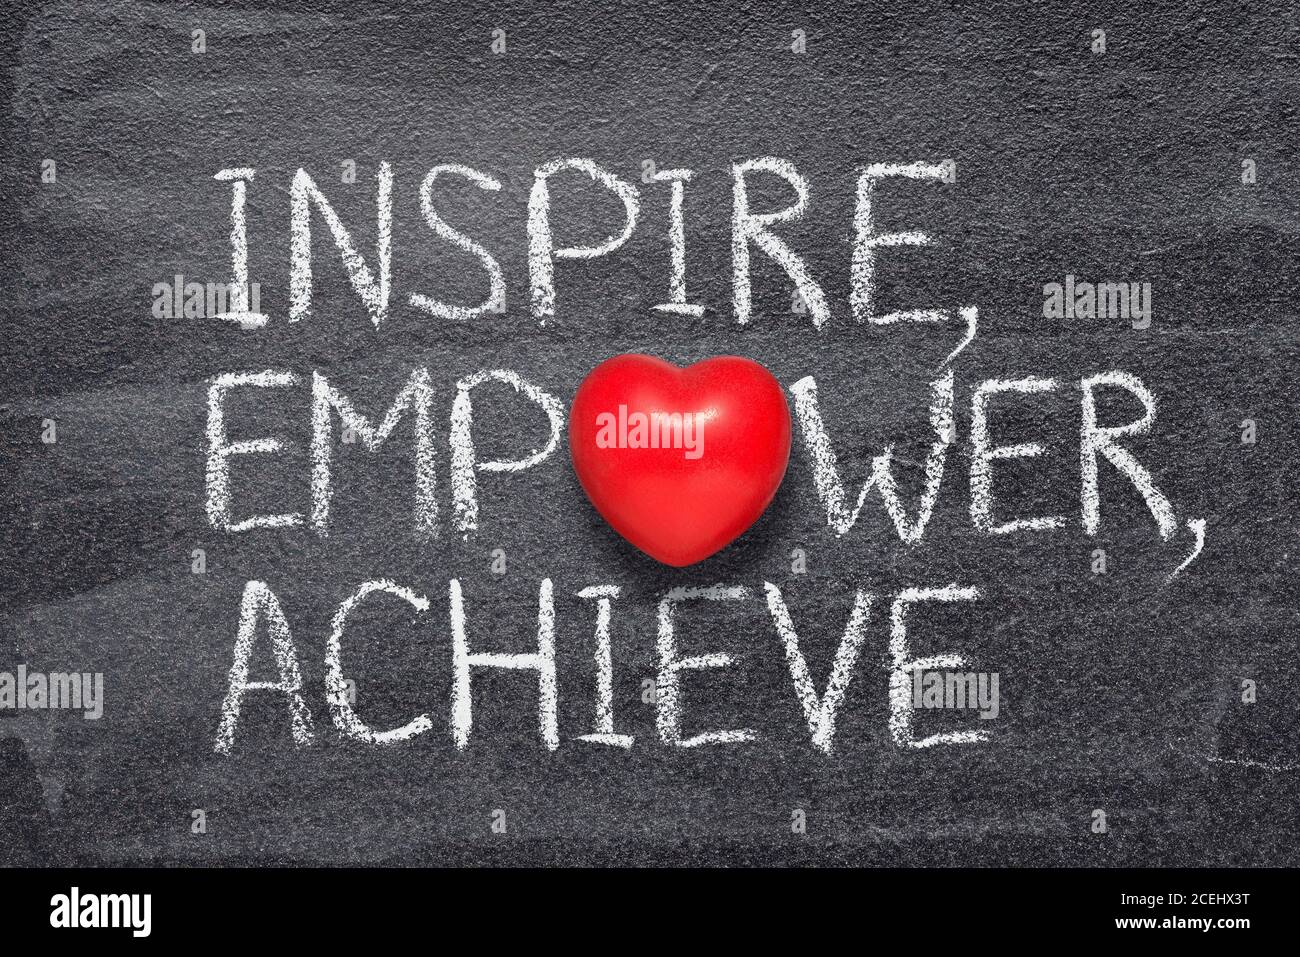 inspire, empower, achieve words written on chalkboard with red heart symbol Stock Photo